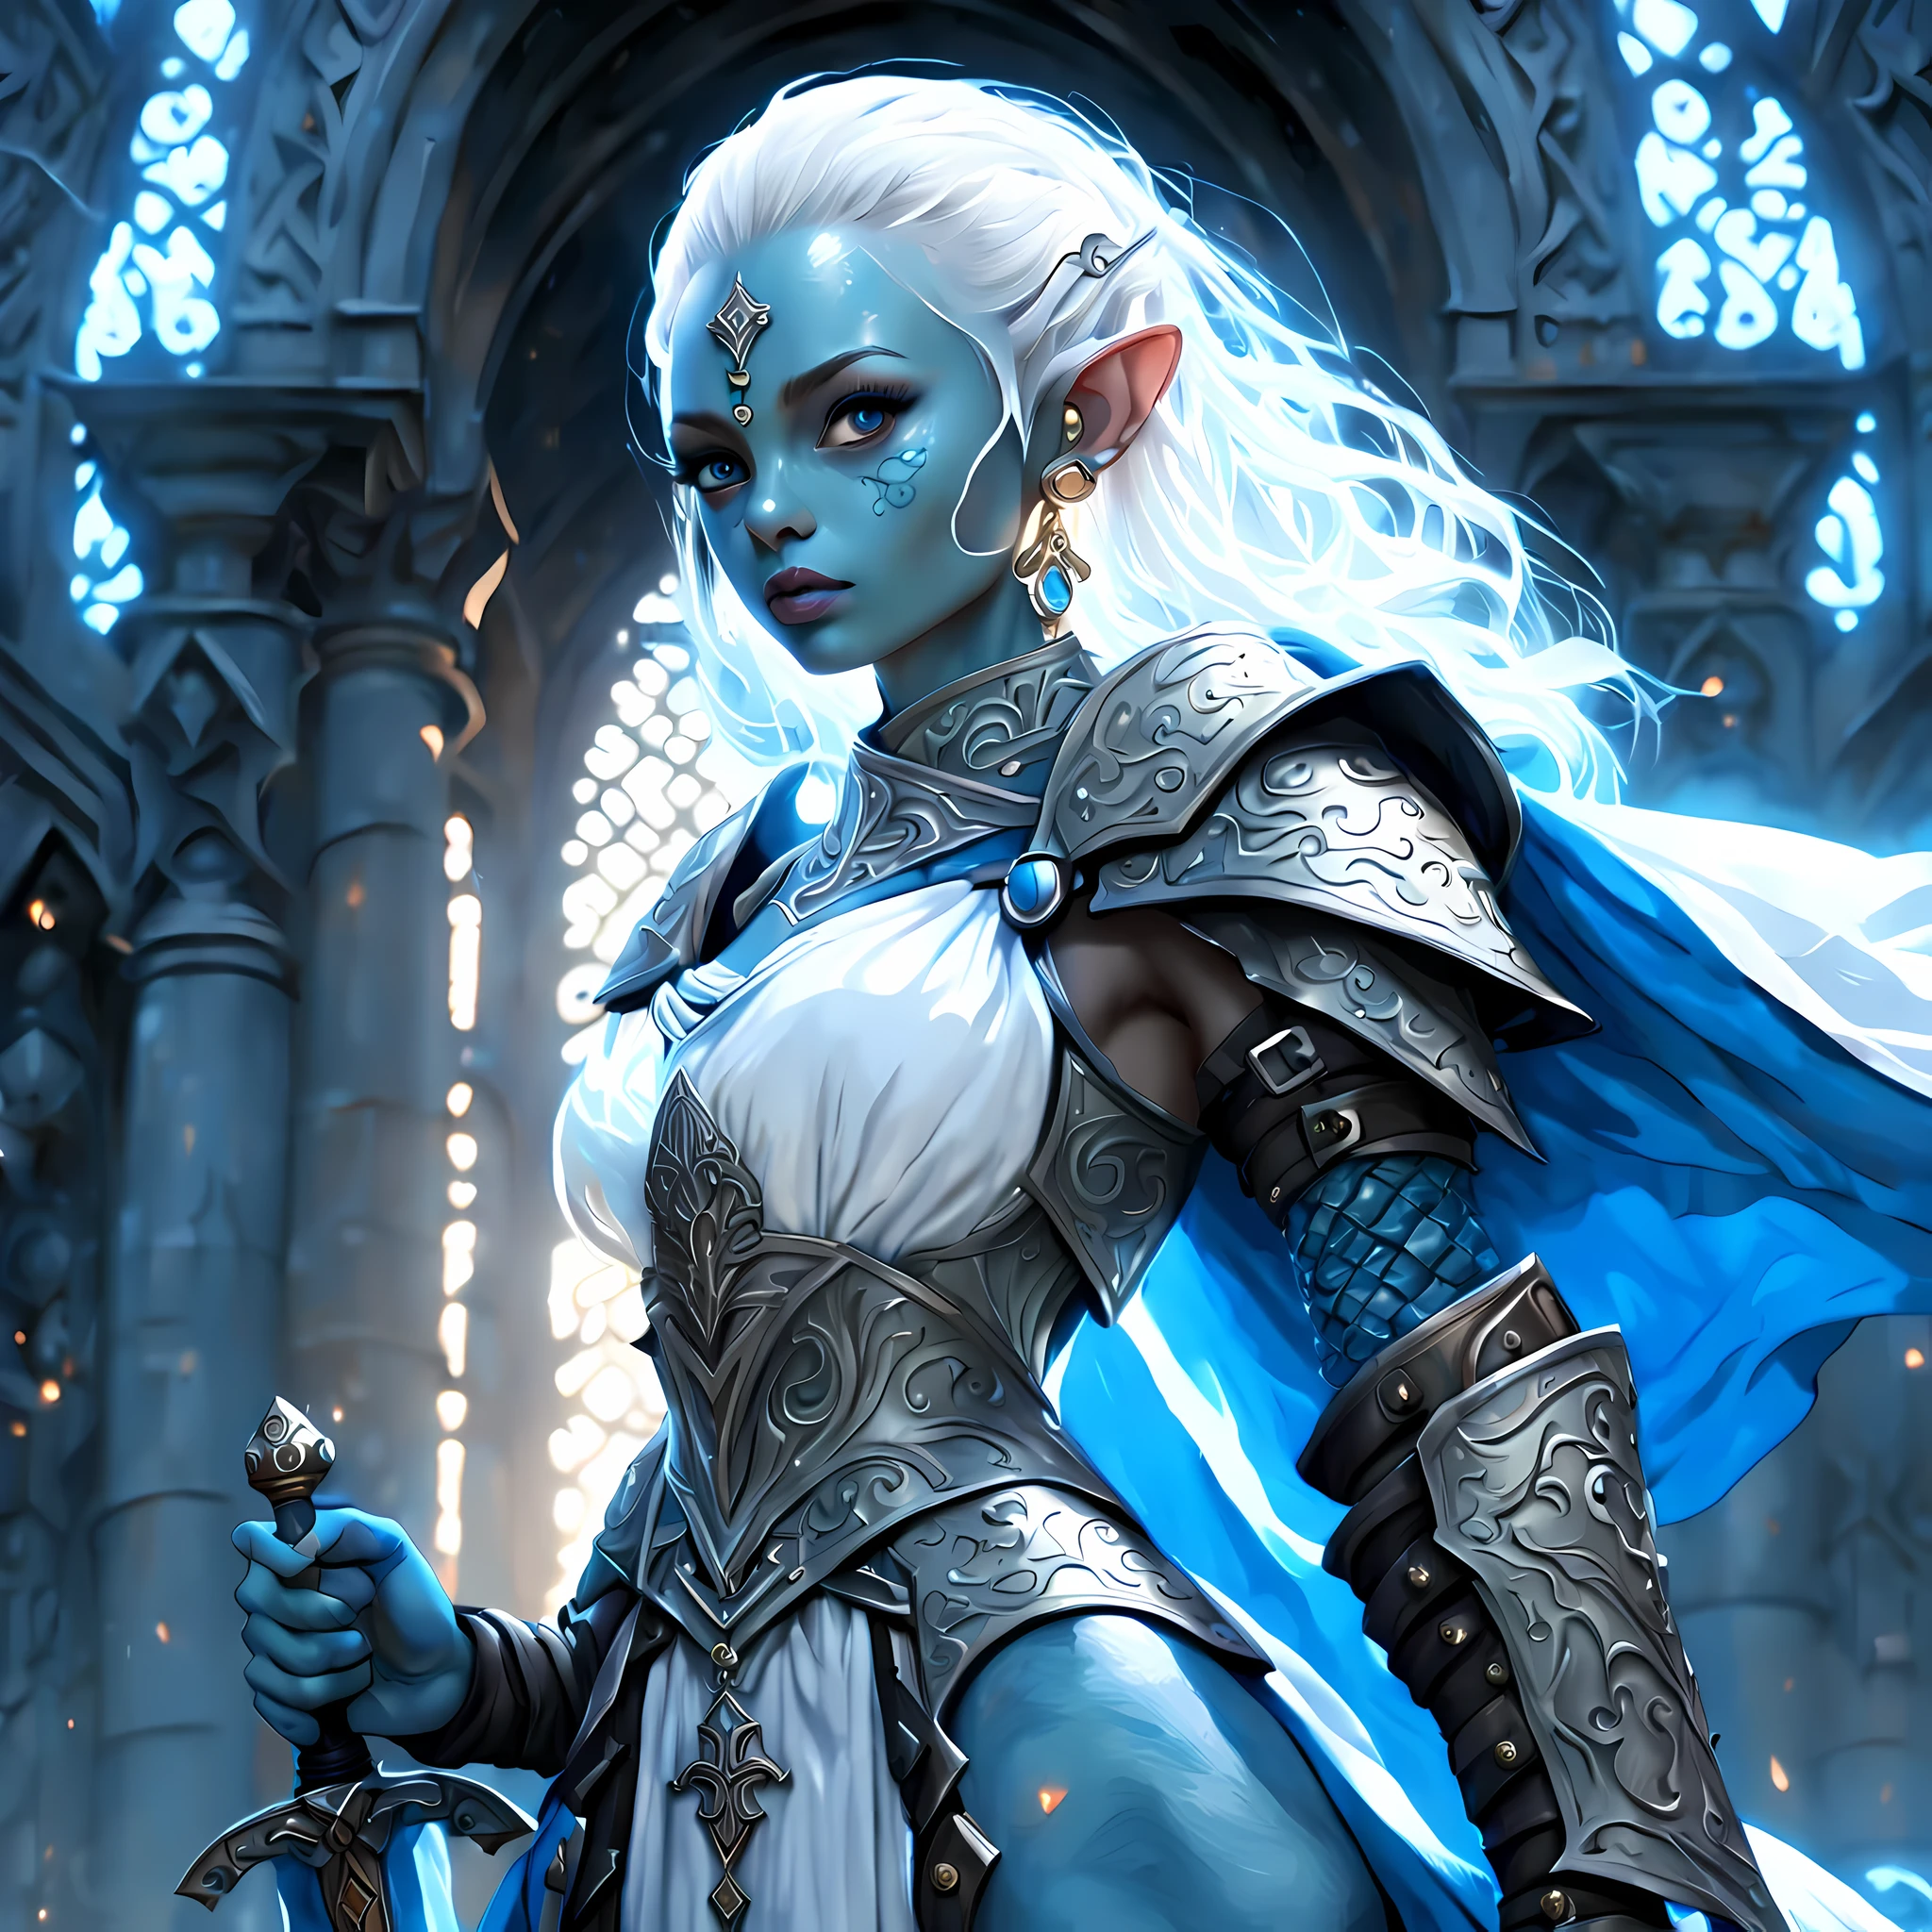 fAntAsy Art, dnd Art, RPG Art, Weitwinkelaufnahme, (mAsterpiece: 1.4) A (portrAit: 1.3) intense detAils, highly detAiled, photoreAlistic, best quAlity, highres, portrAit A femAle (fAntAsy Art, MAsterpiece, best quAlity: 1.3) ((Blau skin: 1.5)), intense detAils fAciAl detAils, exquisite beAuty, (fAntAsy Art, MAsterpiece, best quAlity) Kleriker, (Blau: 1.3) skinned femAle, (Weiß hAir: 1.3), bAld heAd (Grün: 1.3) Auge, fAntAsy Art, MAsterpiece, best quAlity) Armed A fiery sword red fire, weAring heAvy (Weiß: 1.3) hAlf plAte mAil Armor, weAring high heeled lAced boots, weAring An(orAnge :1.3) cloAk, weAring glowing holy symbol GlowingRunes_Gelb, within fAntAsy temple bAckground, Reflexionslicht, high detAils, best quAlity, 16k, [ultrA detAiled], mAsterpiece, best quAlity, (extremely detAiled), Nahaufnahme, ultrA Weitwinkelaufnahme, photoreAlistic, Roh, fAntAsy Art, dnd Art, fAntAsy Art, reAlistic Art,((best quAlity)), ((mAsterpiece)), (detAiled), perfect fAce, ((no eArs: 1.6))